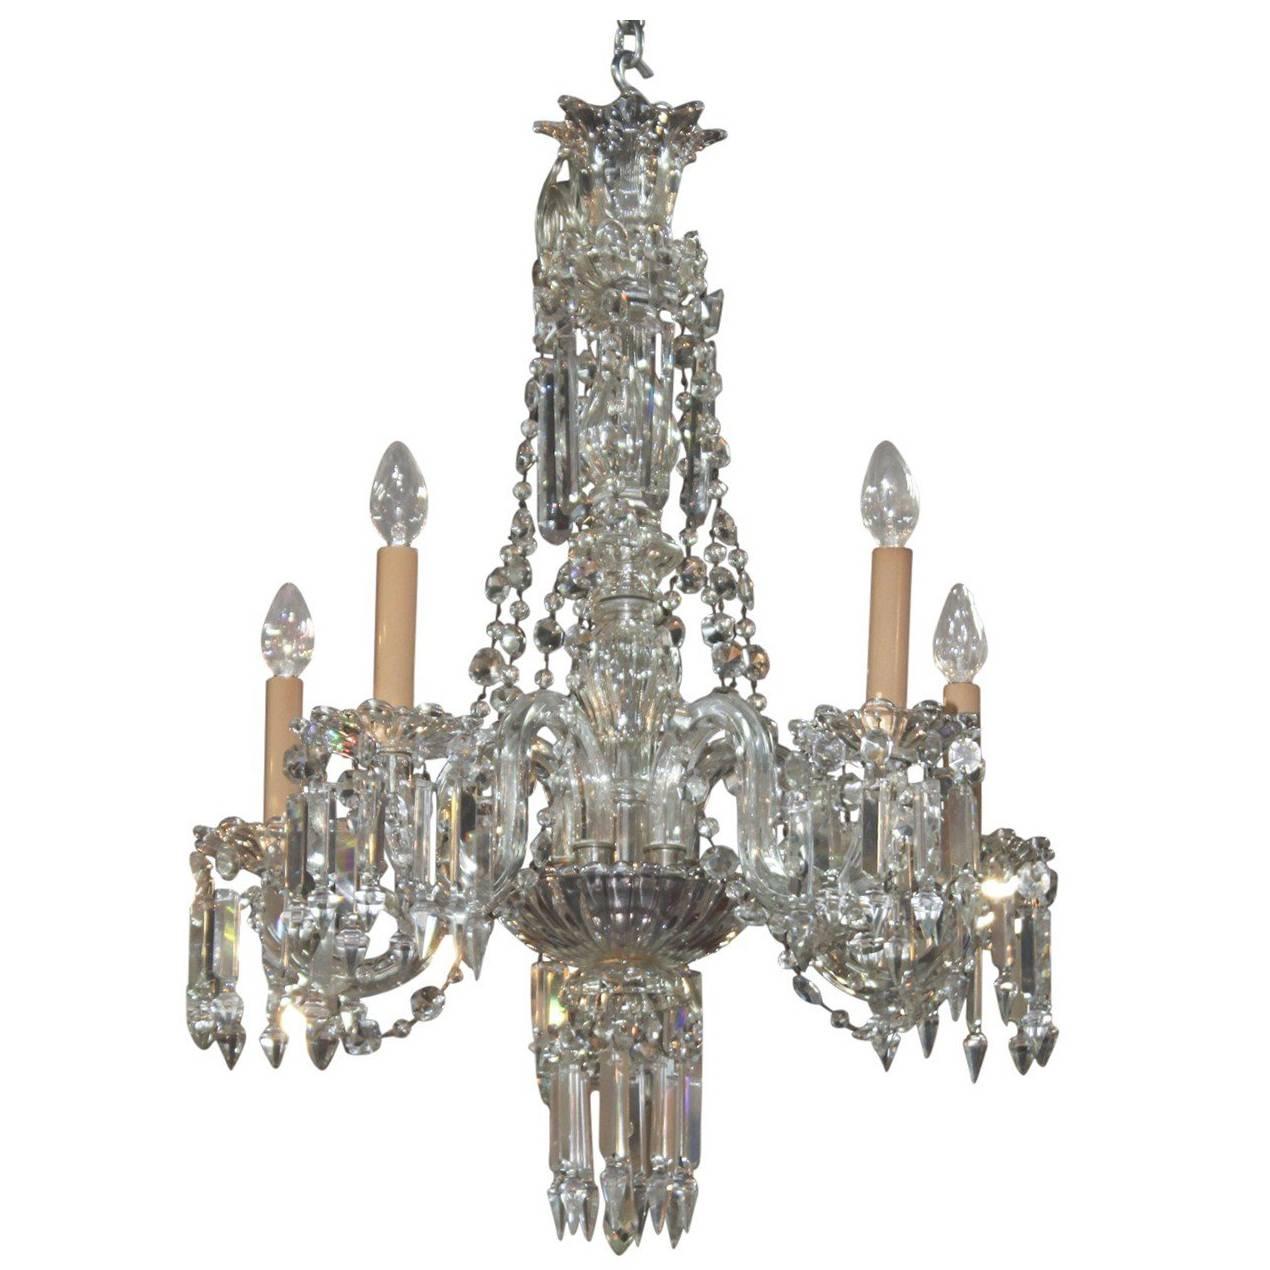 English Waterford Style Crystal Chandelier, circa 1890